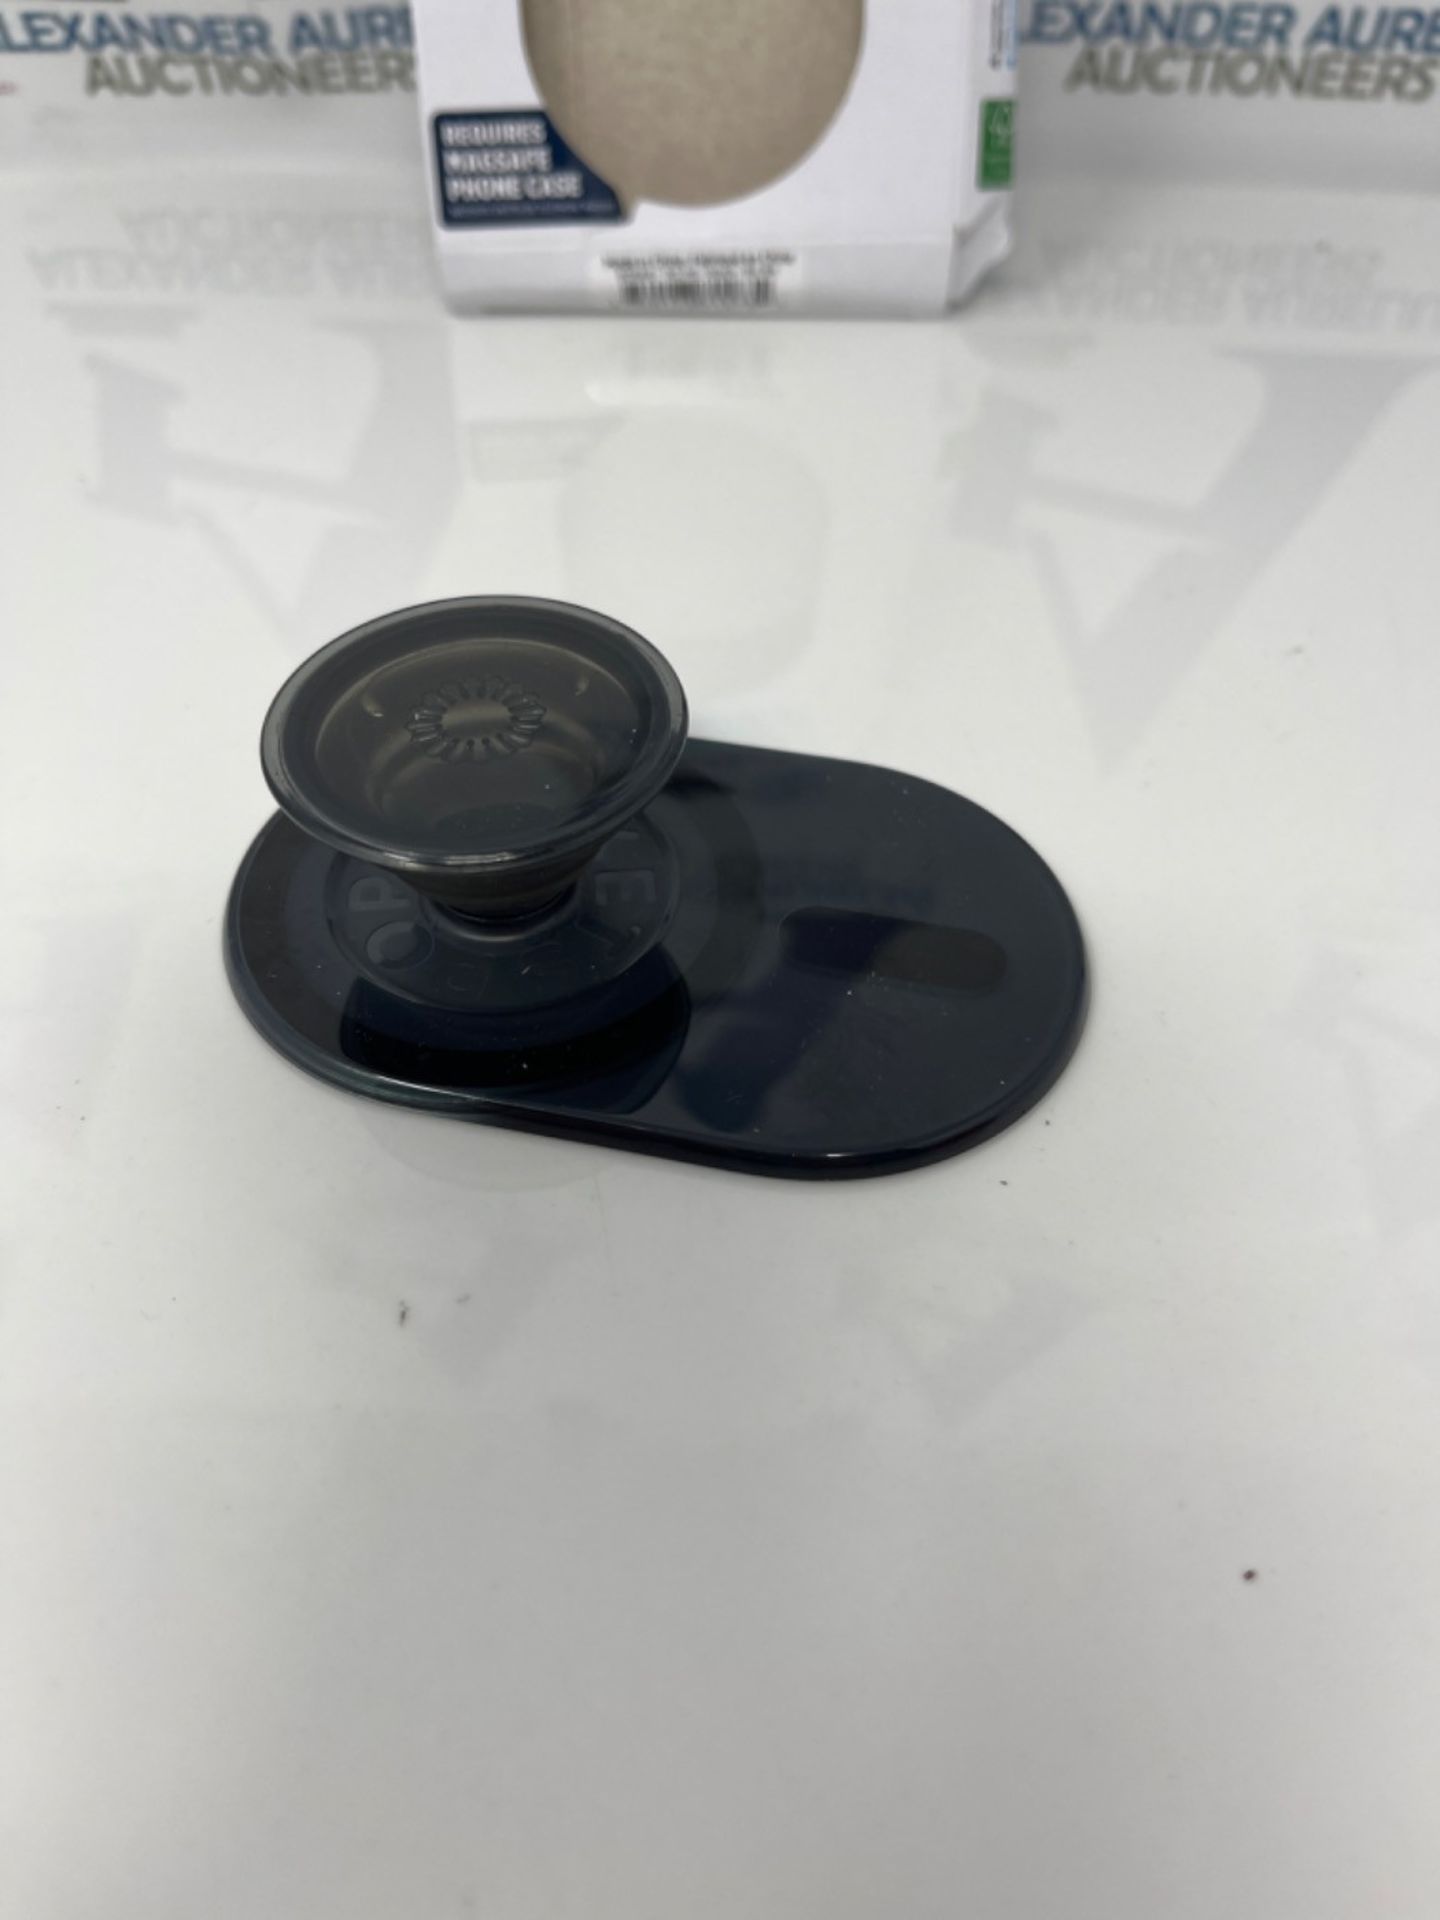 PopSockets: PopGrip for MagSafe - Expanding Phone Stand and Grip with a Swappable Top - Bild 3 aus 3